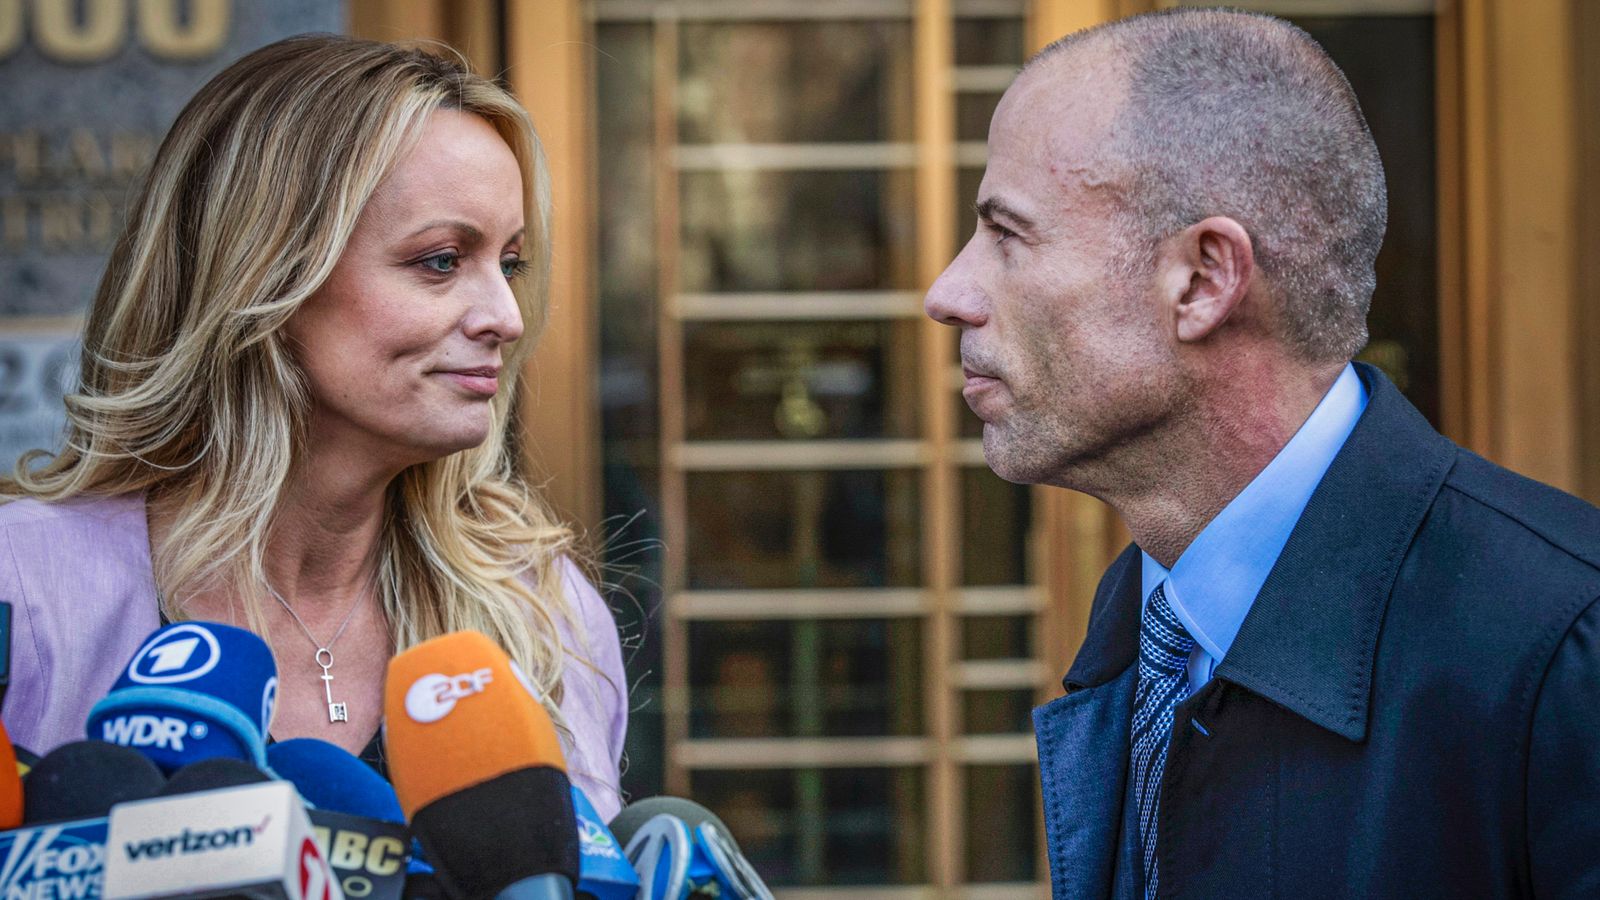 Michael Avenatti: Celebrity lawyer and former Trump foe gets 14 more years in prison